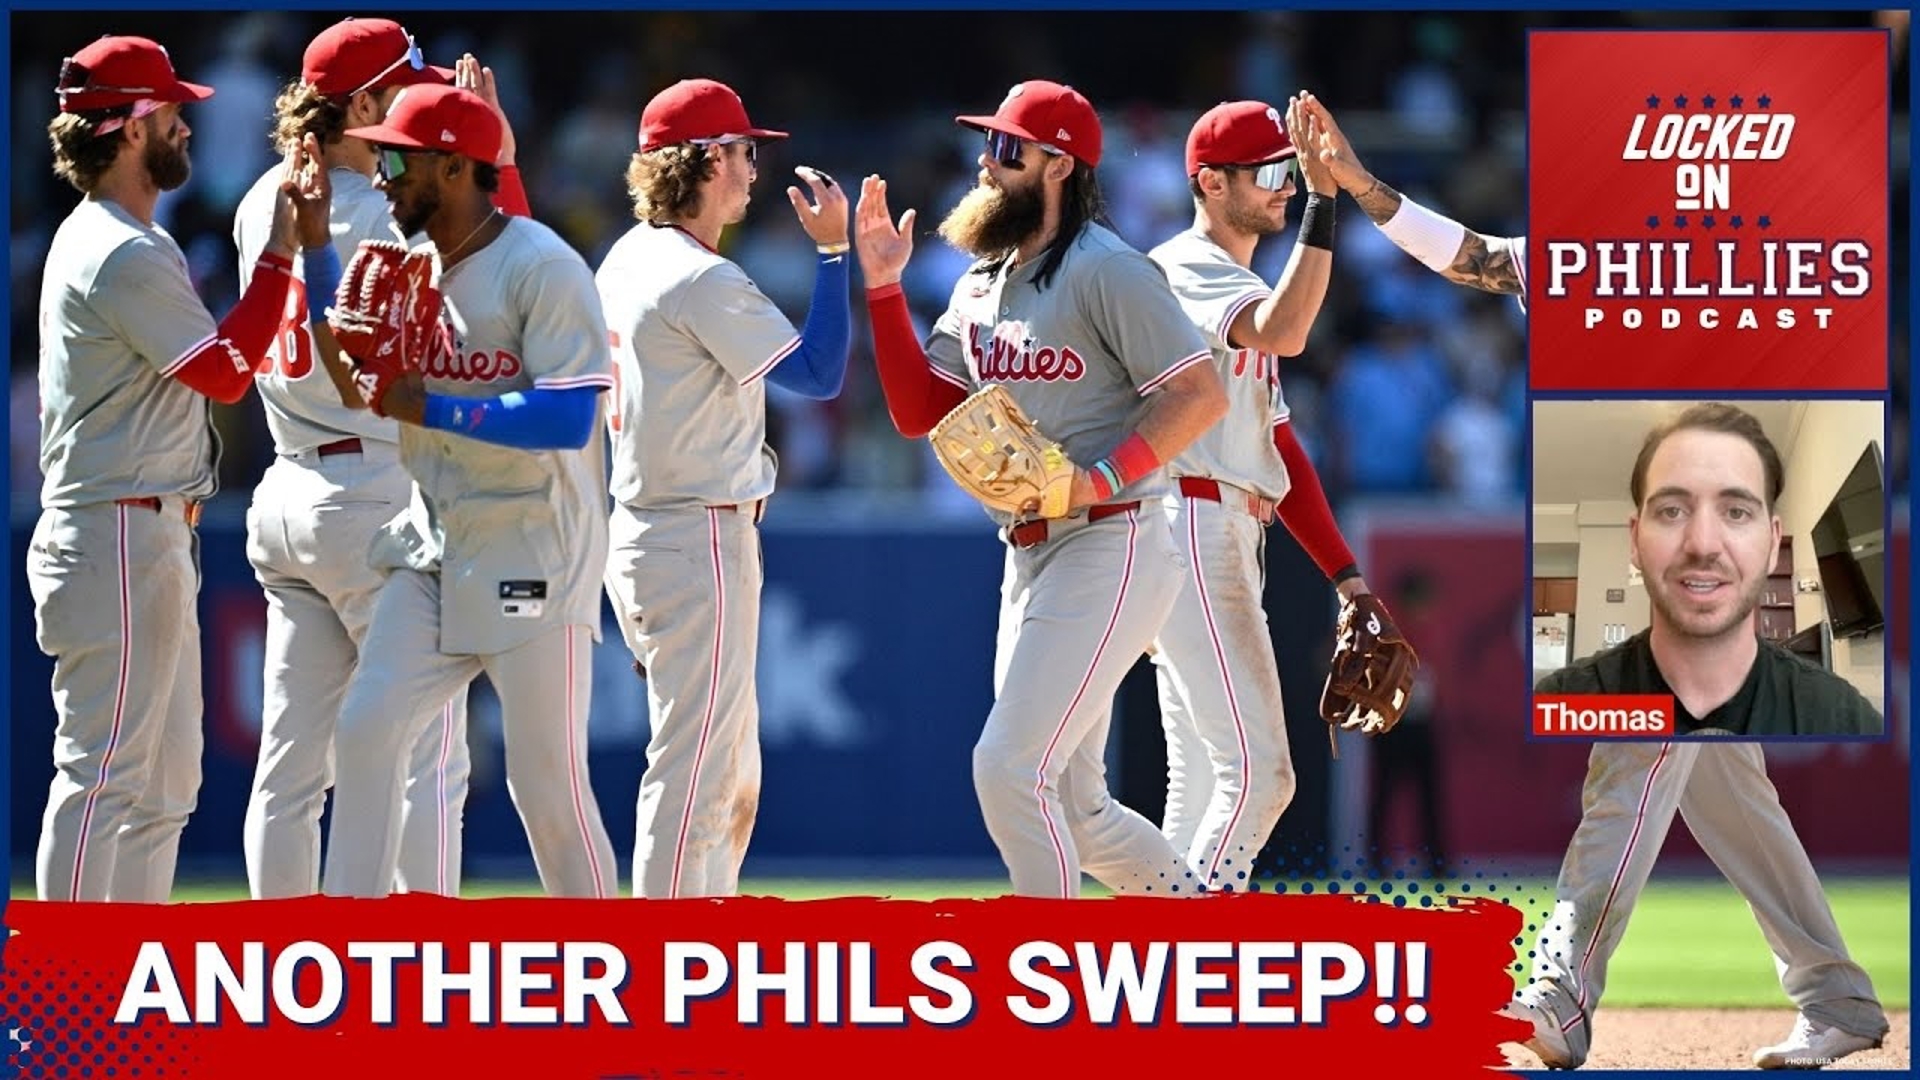 In today's episode, Connor reacts to the weekend sweep the Philadelphia Phillies earned over the San Diego Padres!